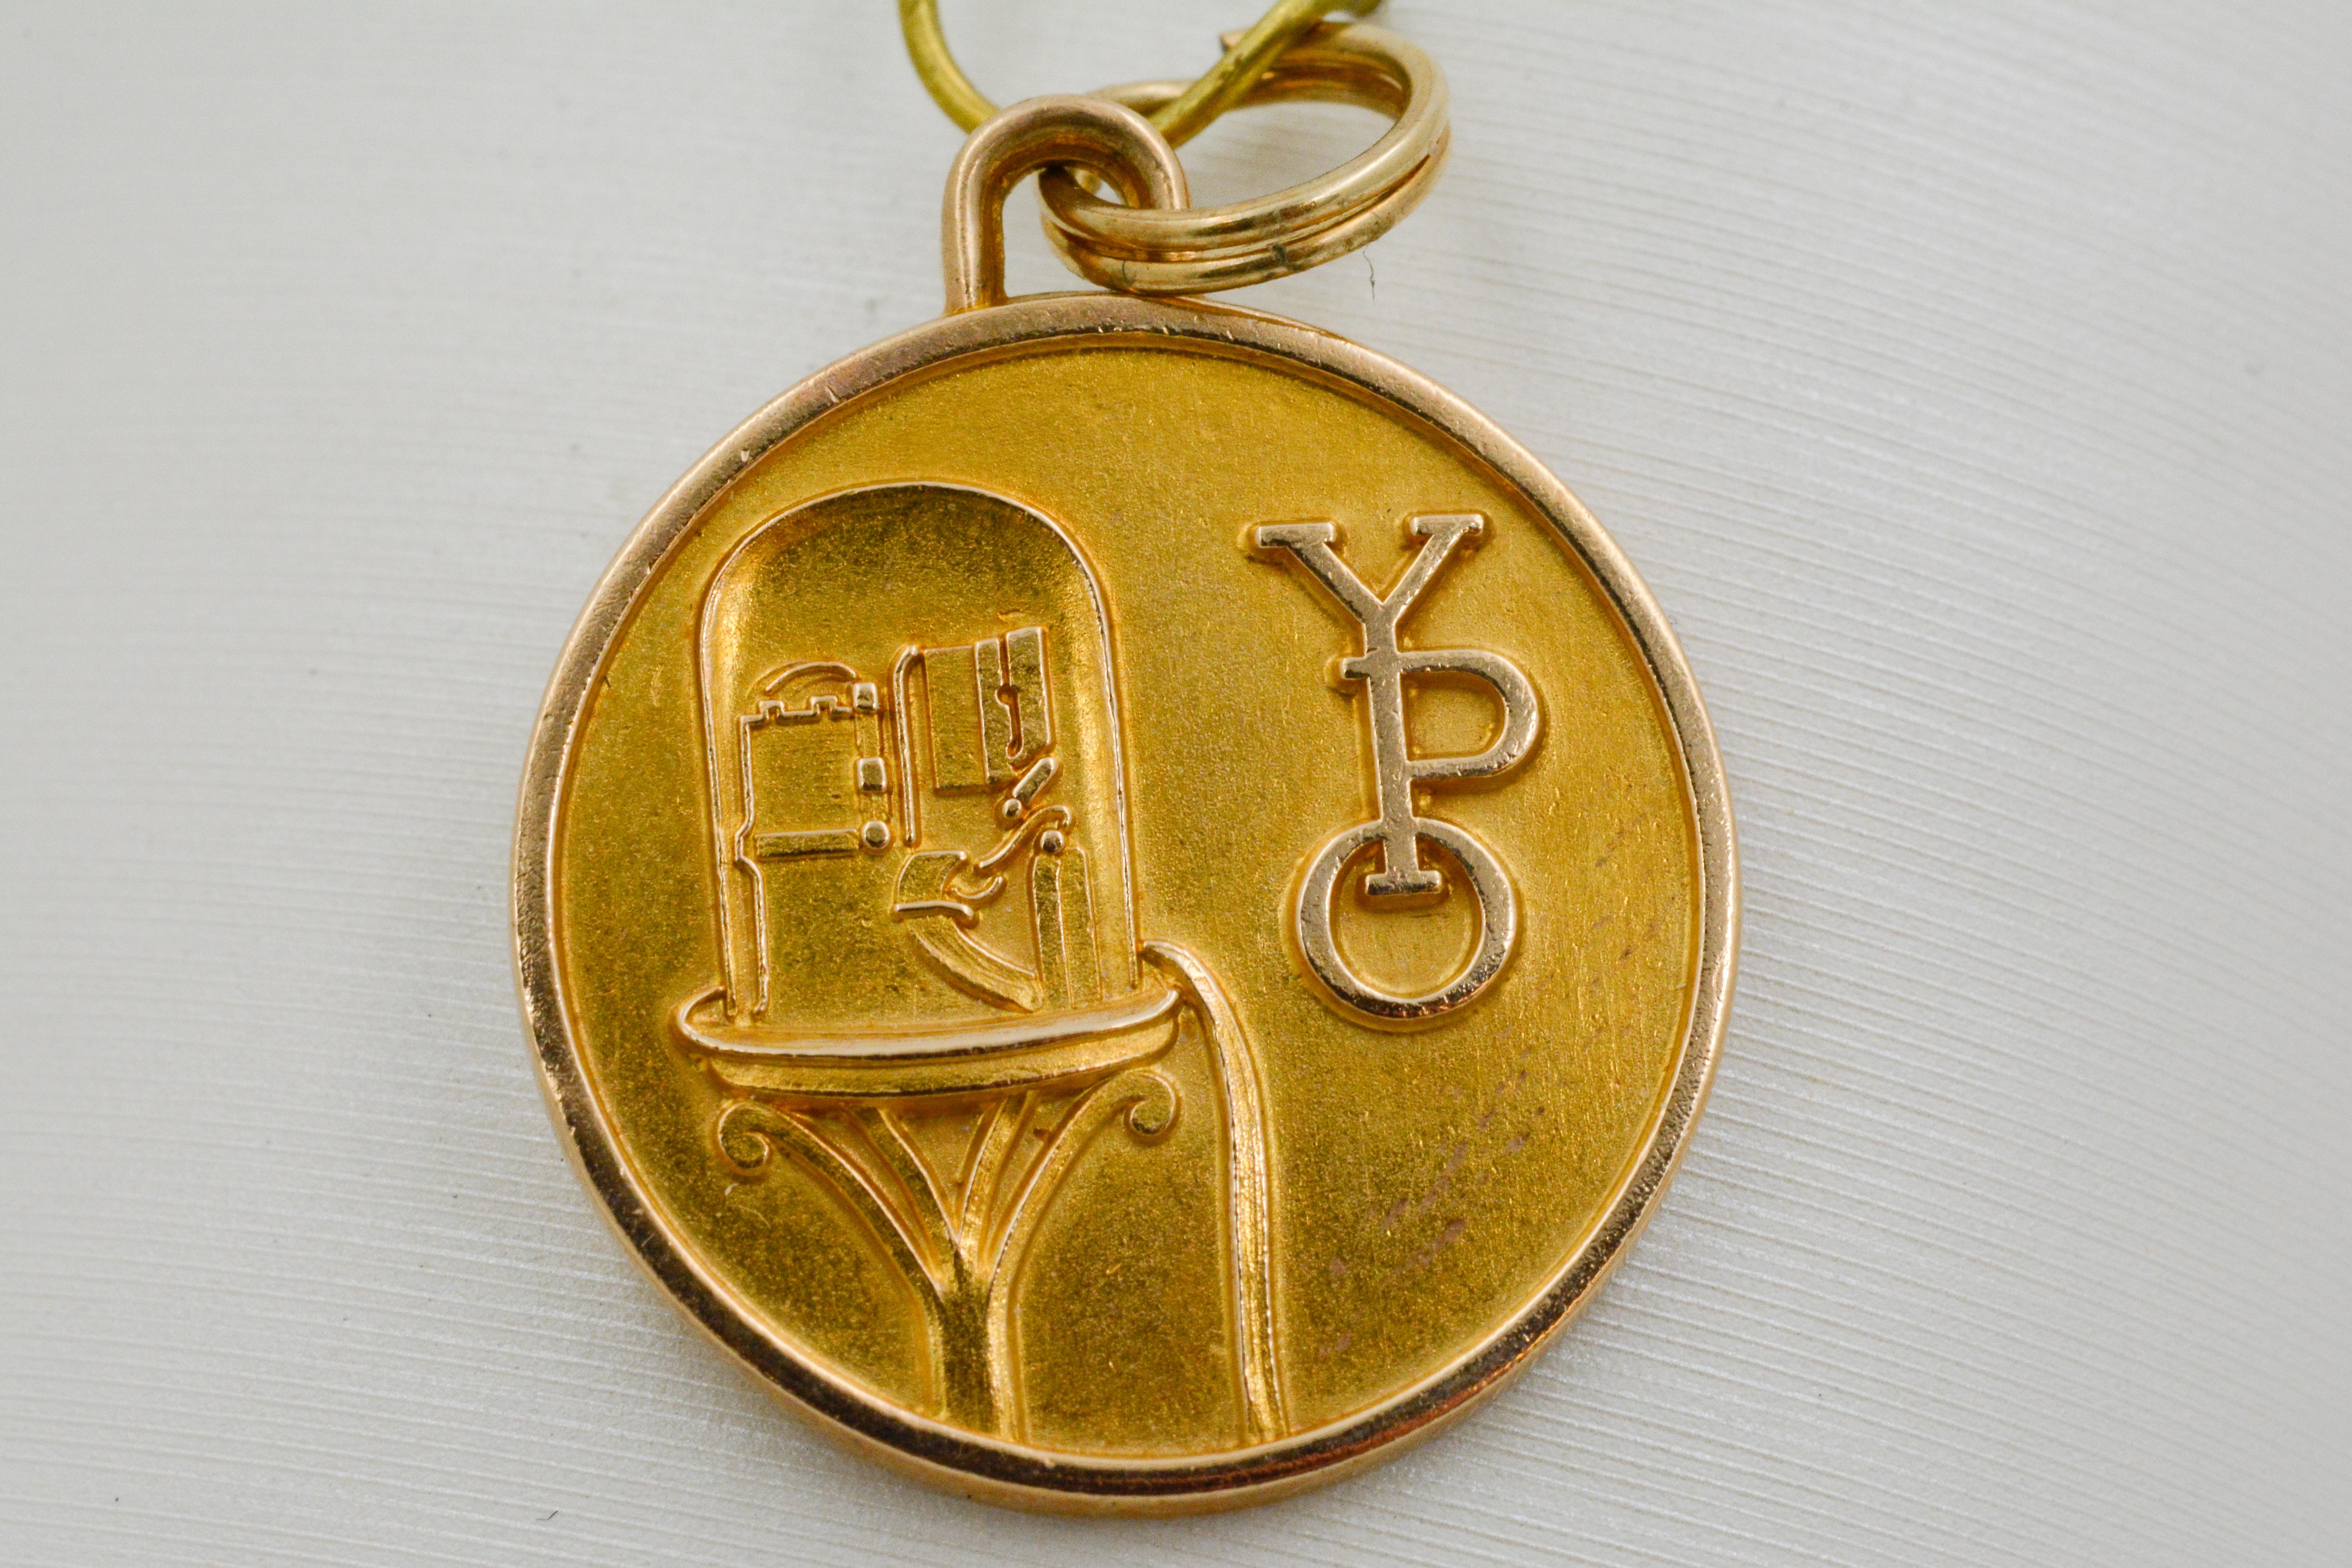 Crafted with 14kt yellow gold, this charm features a Wall Street image and the letters “YPO” on the front. “Wall Street Seminar Dec. 5-8 1971” is embossed on the reverse. Measuring 19.18mm in diameter, 1.60mm thick, and weighing 4.2g. This charm is